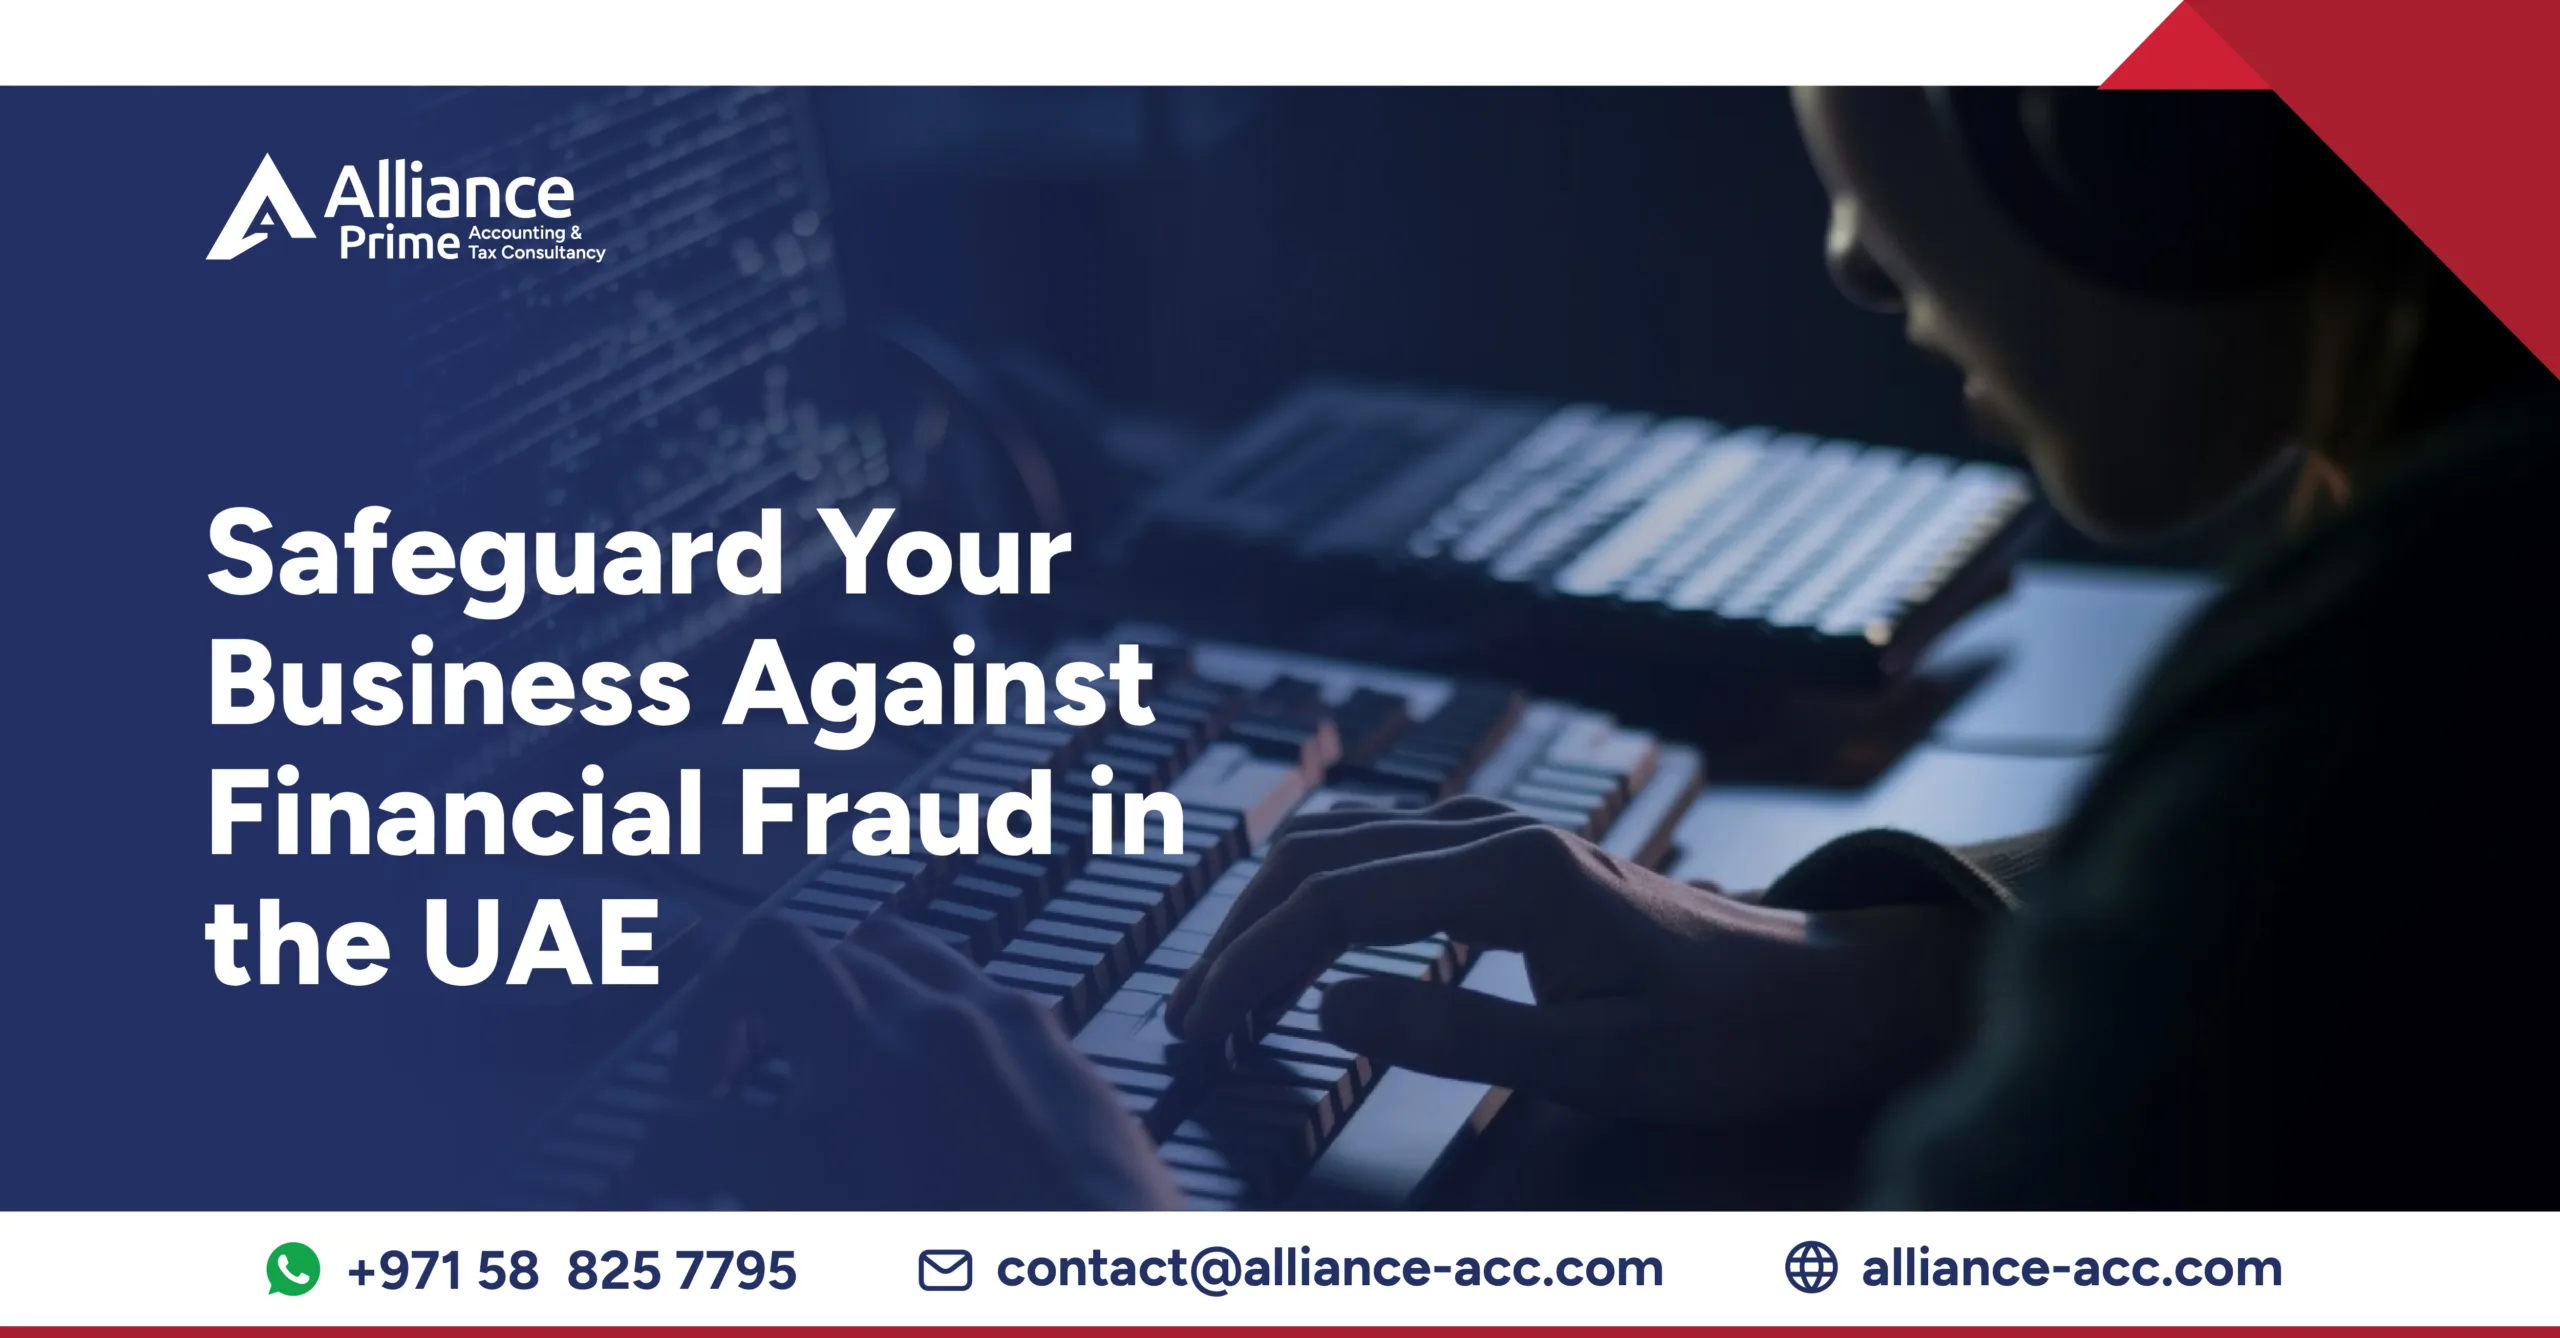 Safeguard Your Business Against Financial Fraud in the UAE